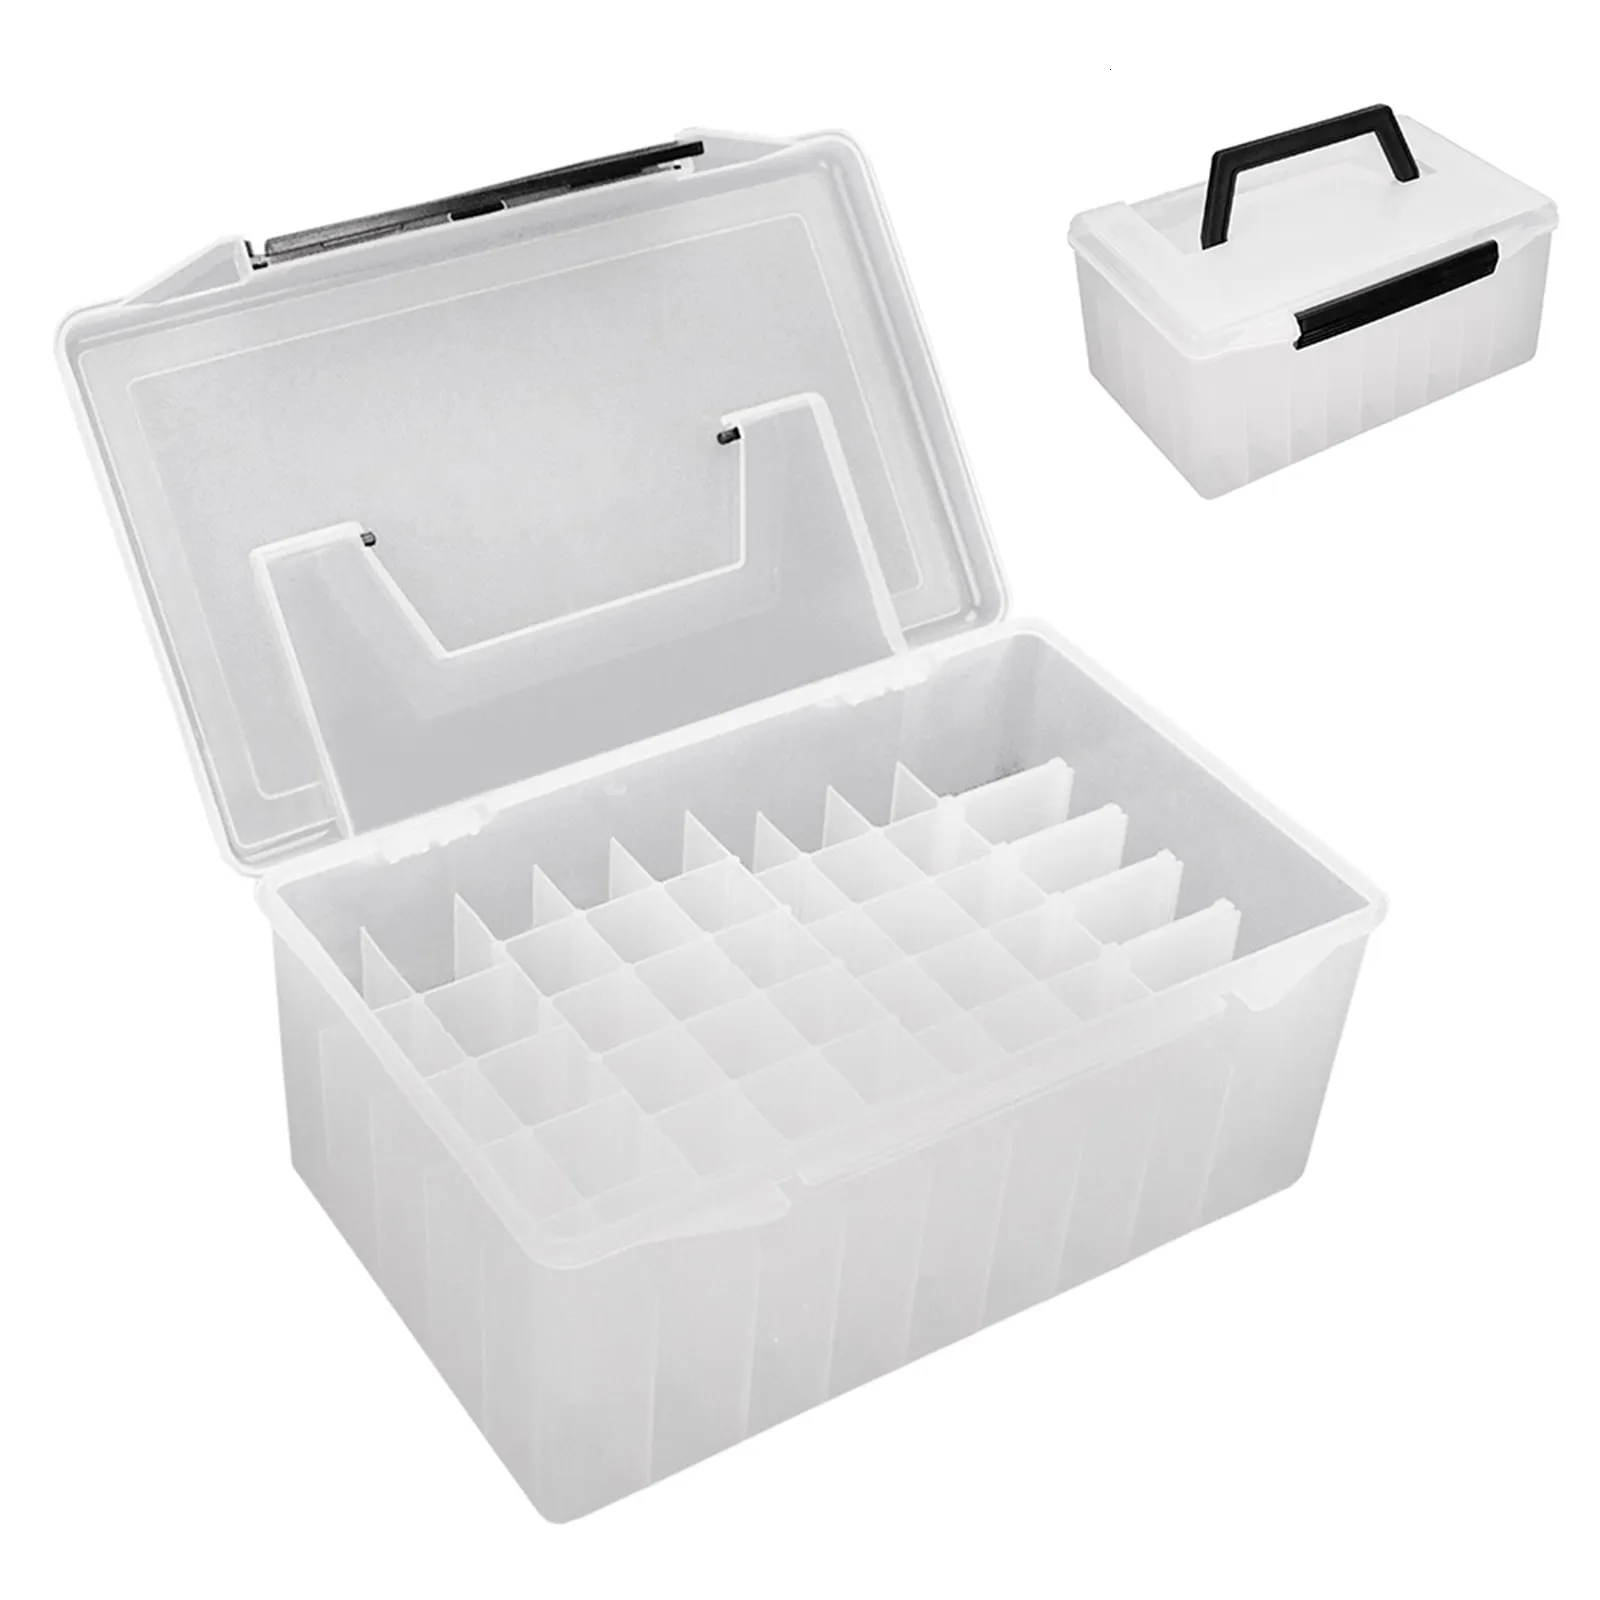 High Quality PVC Fishing Rod Box Storage Box 52 Accessories For Tackle And  Accessories 230720 From Mang09, $24.22